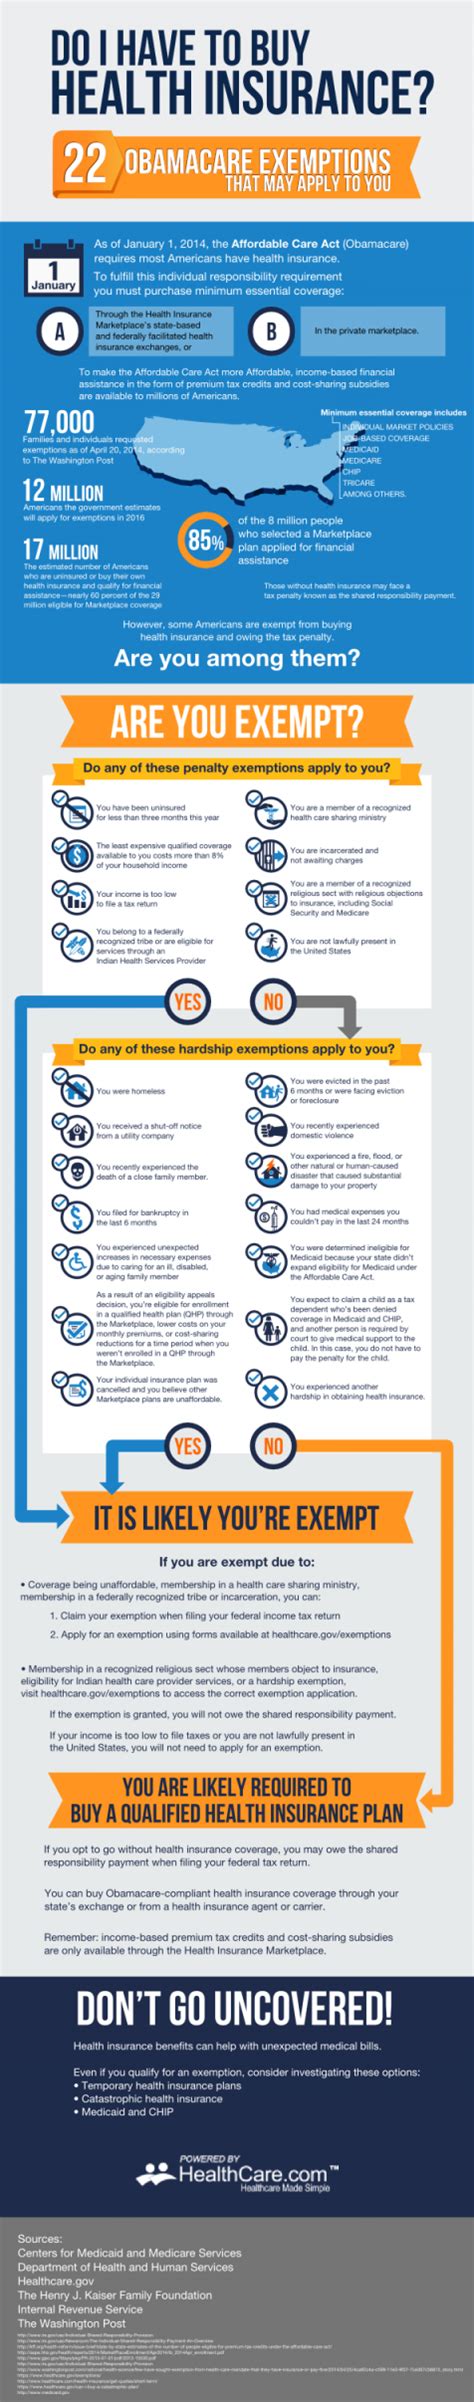 Health sharing plans (also known as health sharing ministries), where members agree to pay one another's medical bills, aren't actually health insurance and may not be a good substitute. Do you have to buy health insurance? 22 Obamacare exemptions listed in this infographic | Buy ...